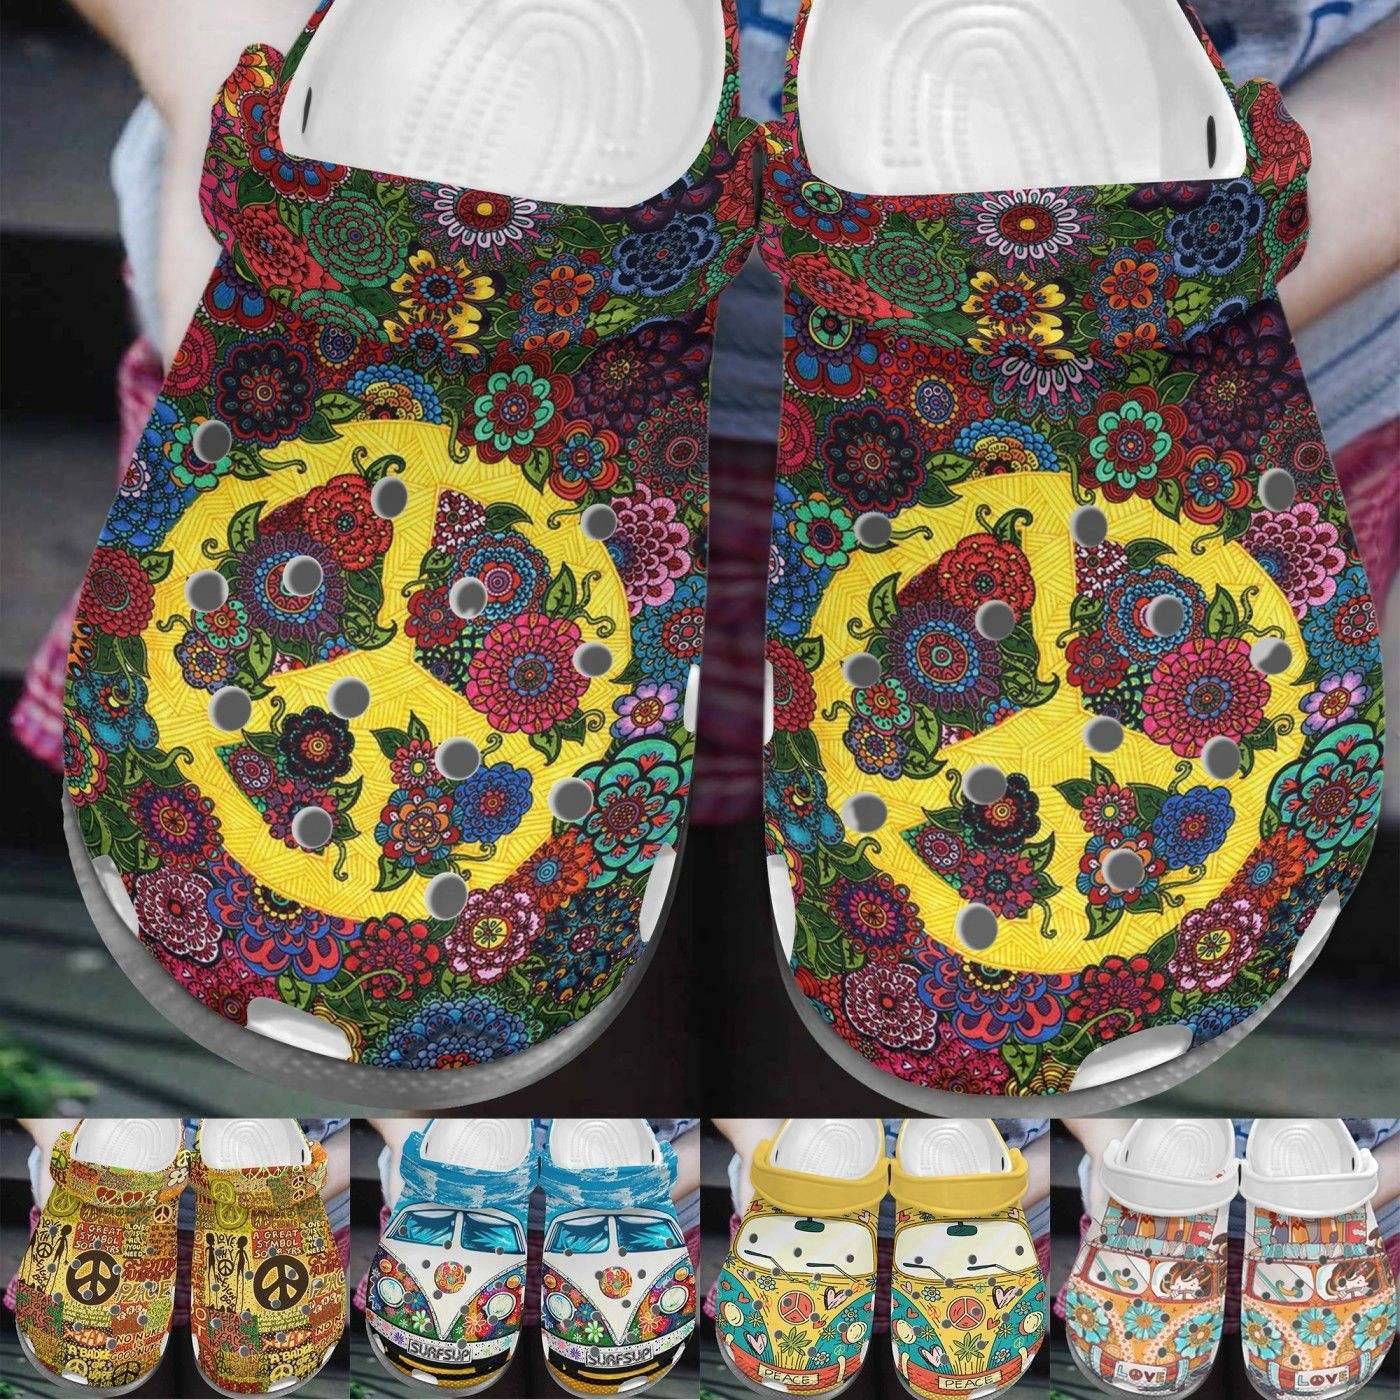 The Peace Sign Shoes Crocss Funny Bus Camping Baseball Shoes Crocbland Clog For Daughter Son